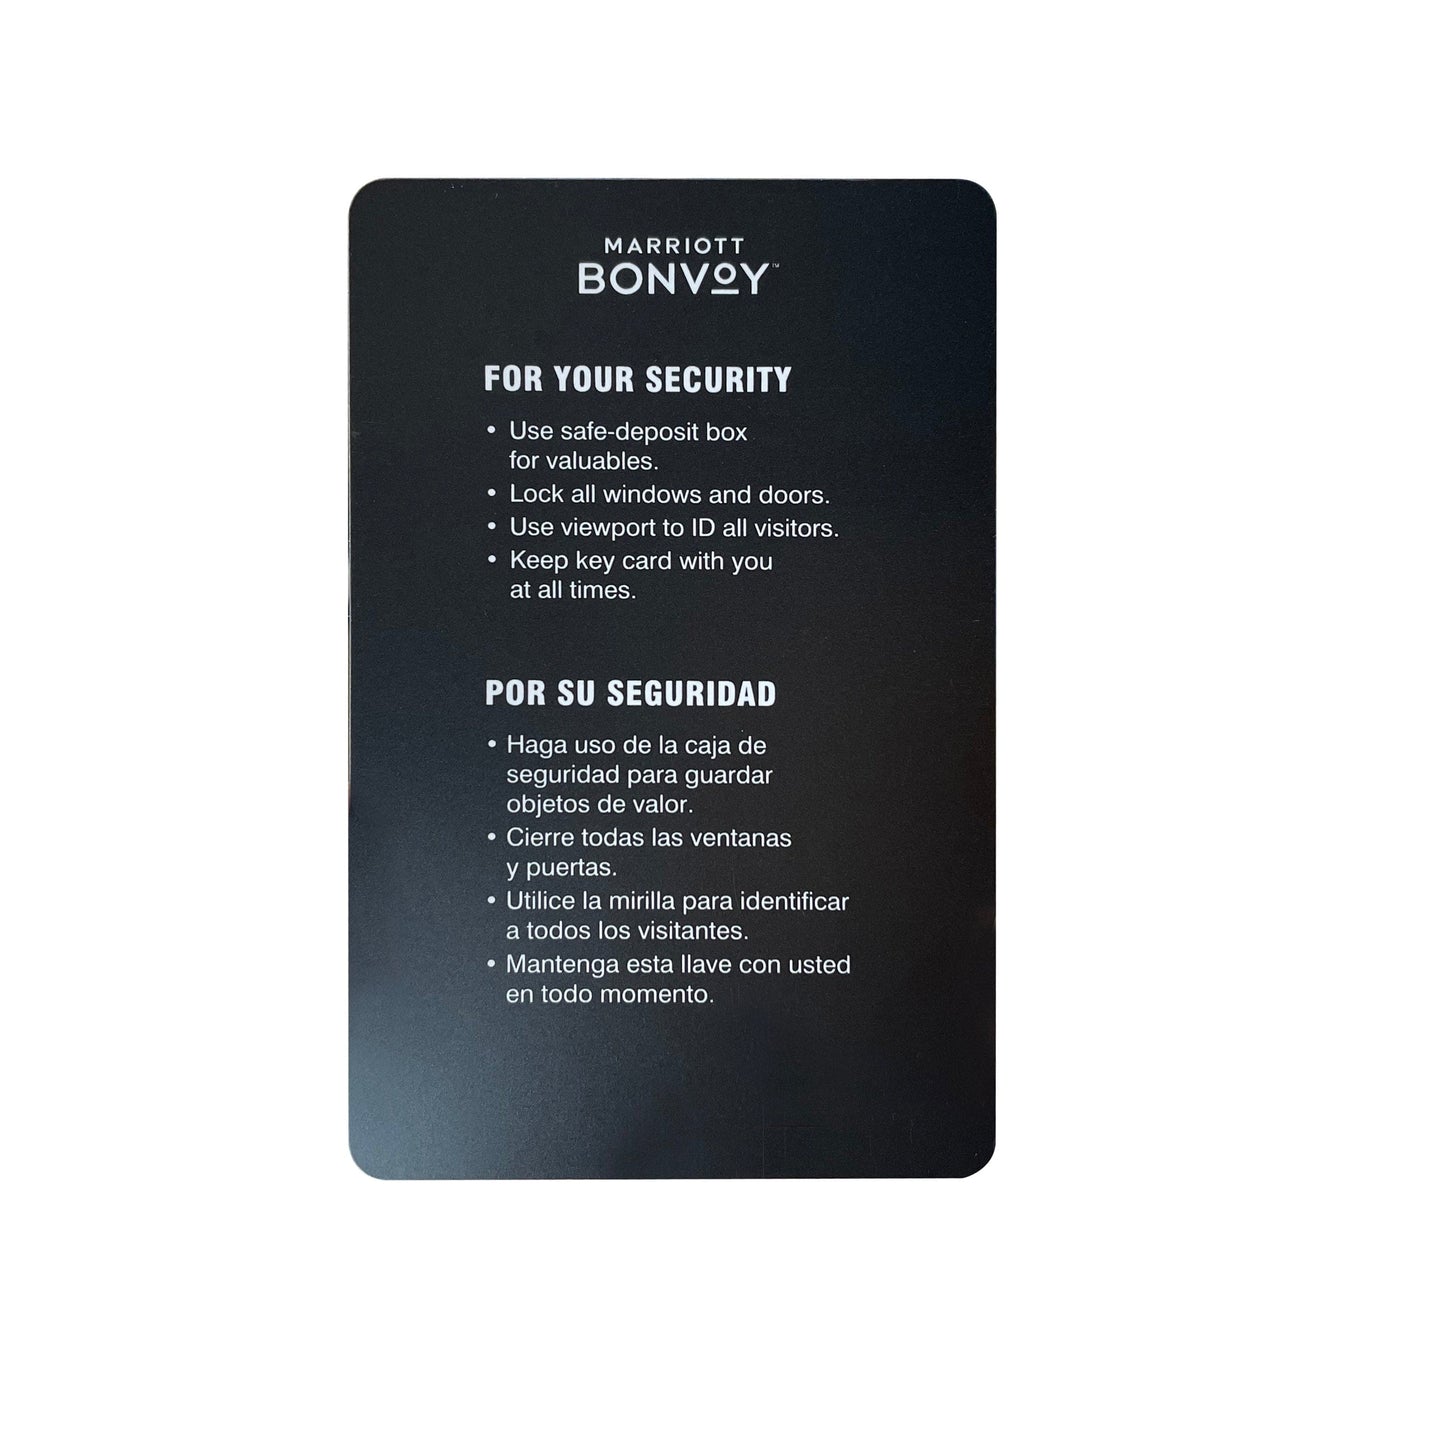 Marriott Bonvoy ULEV1 48 byte RFID Key Cards Compatible with Assa Abloy* Guest Lock Systems-See Description (Sold in boxes of 200)